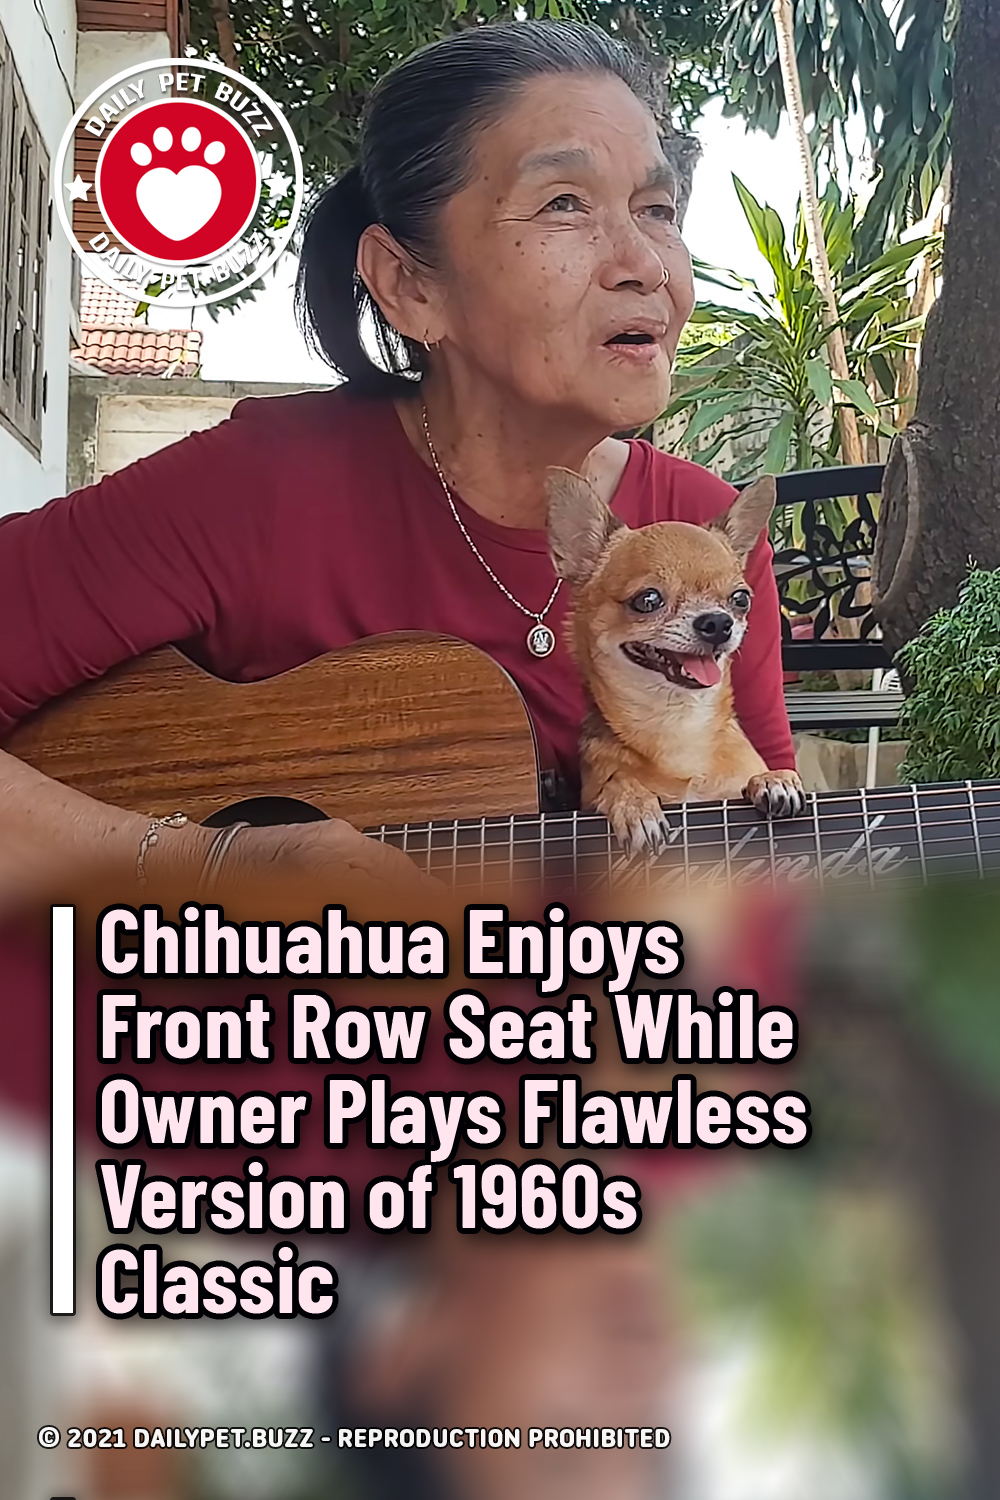 Chihuahua Enjoys Front Row Seat While Owner Plays Flawless Version of 1960s Classic